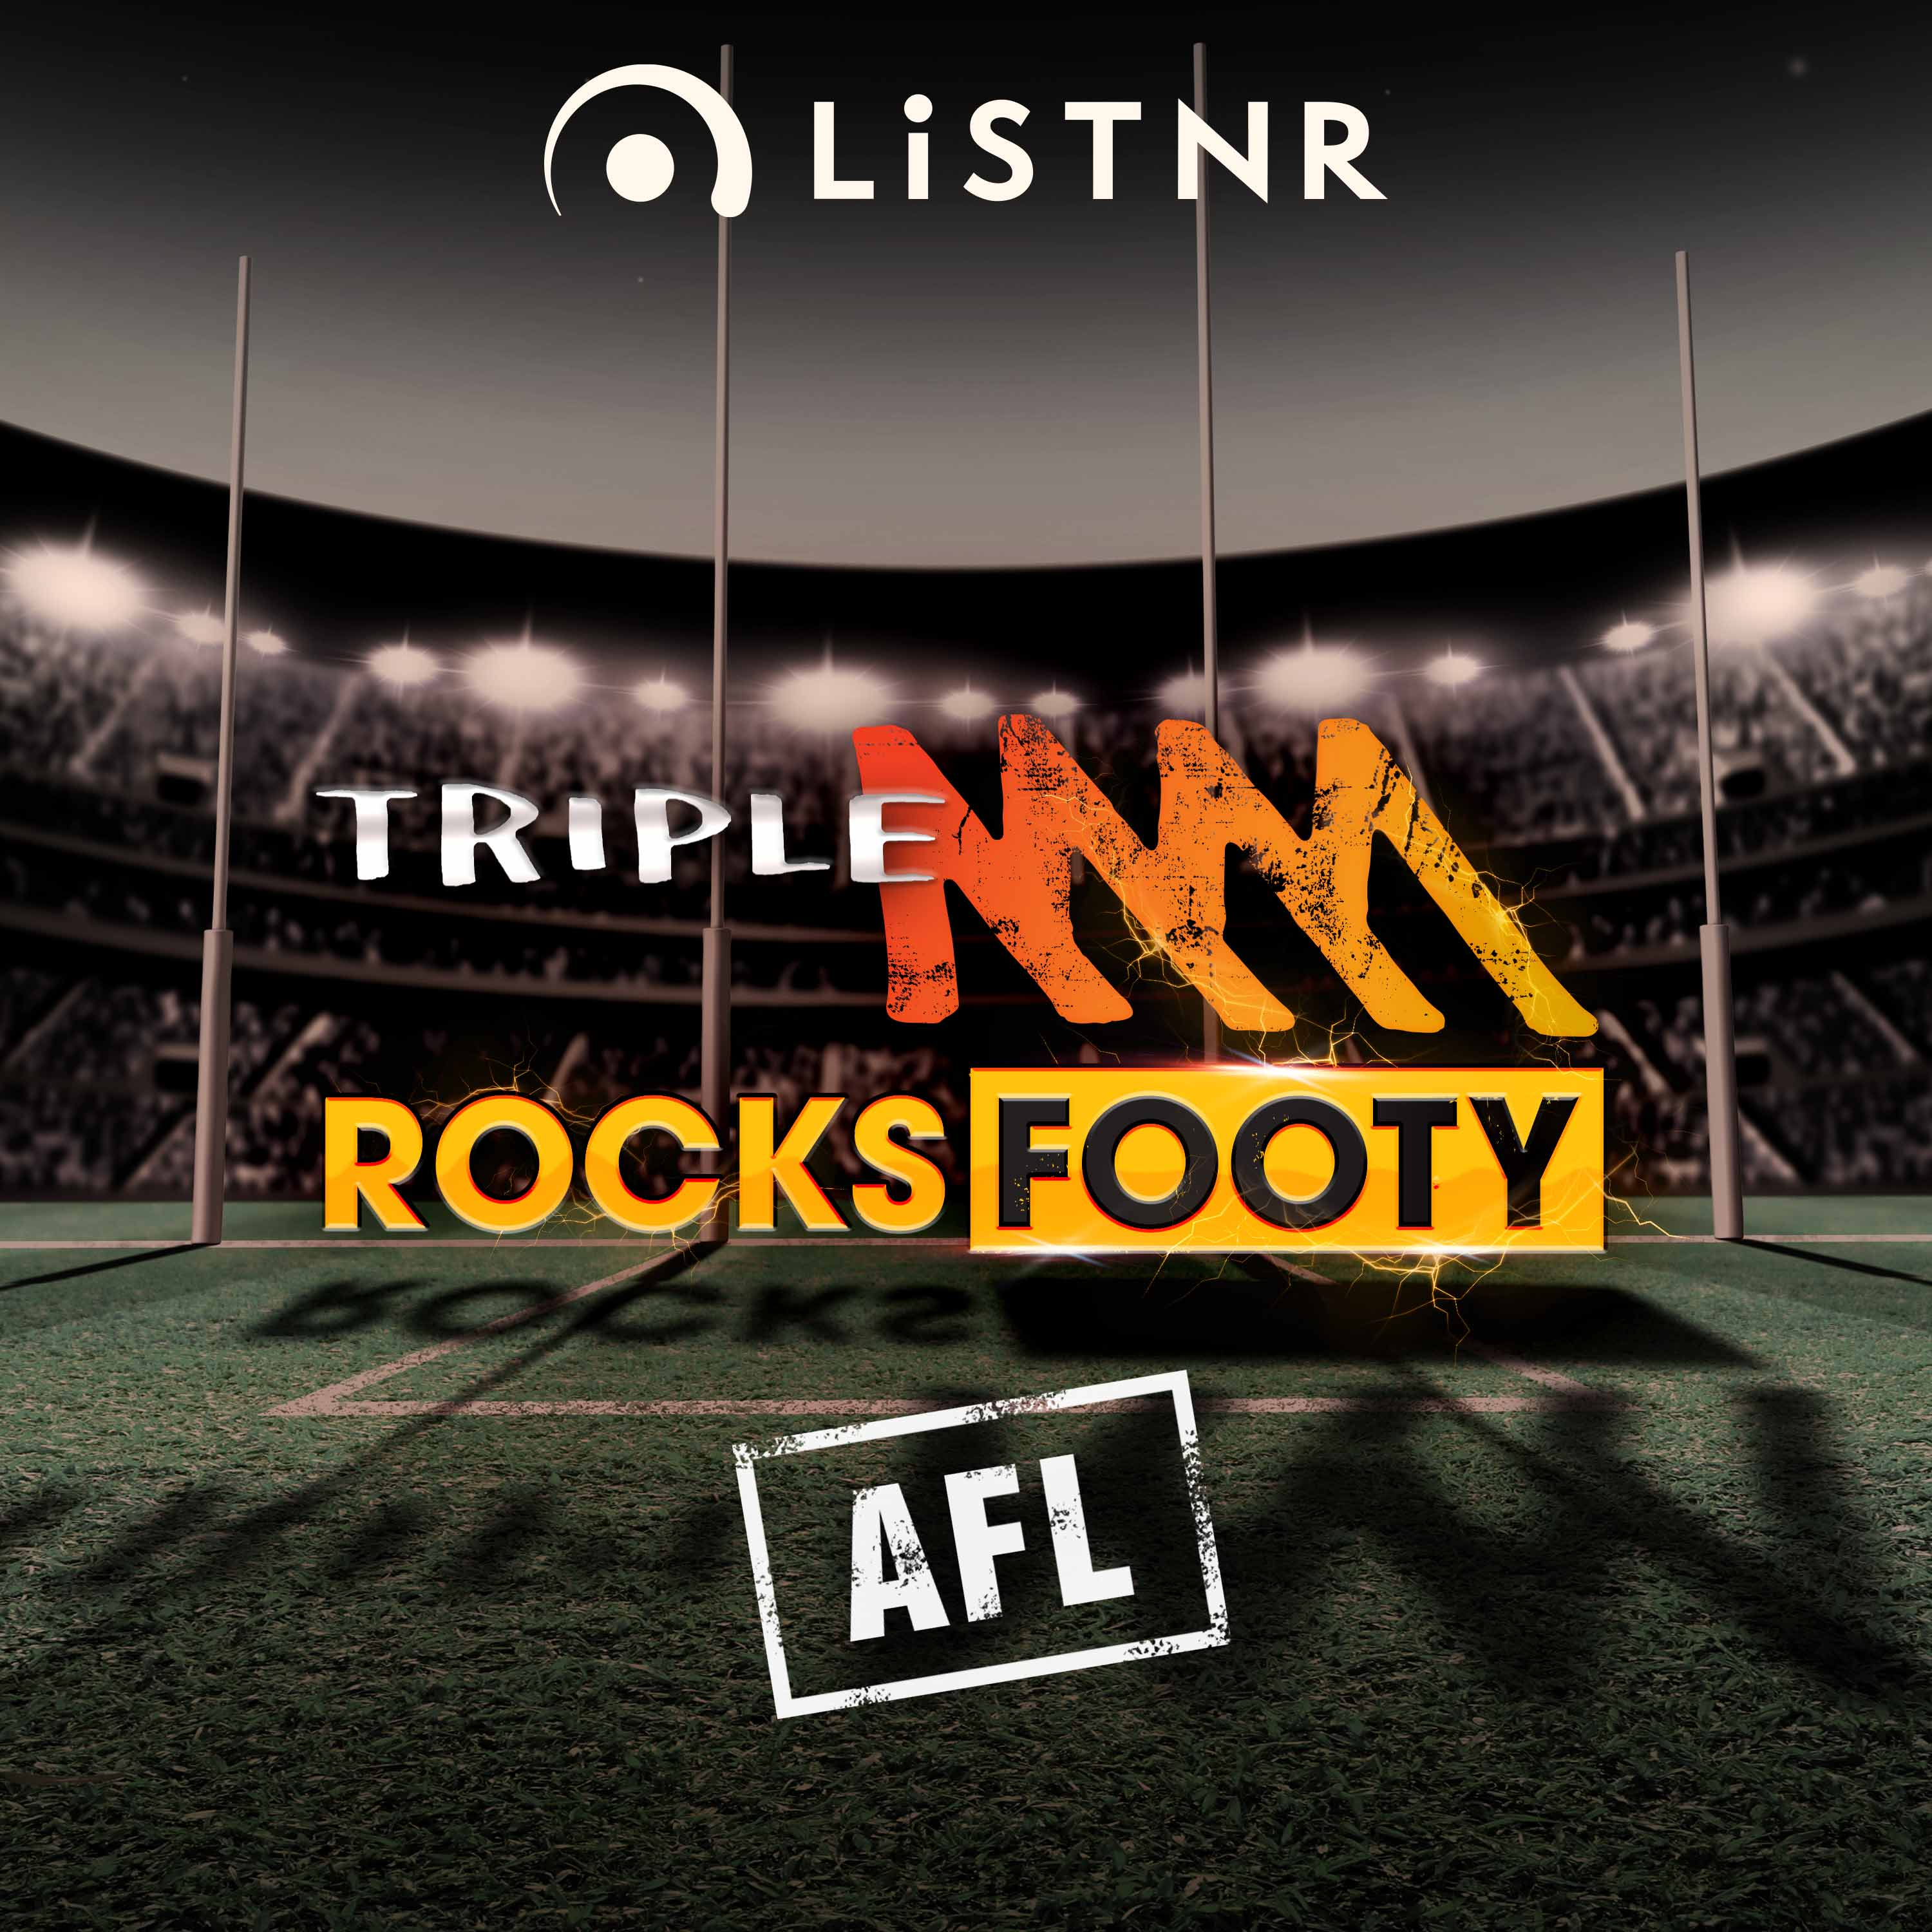 Triple M's call of Calsher Dear's first AFL goal